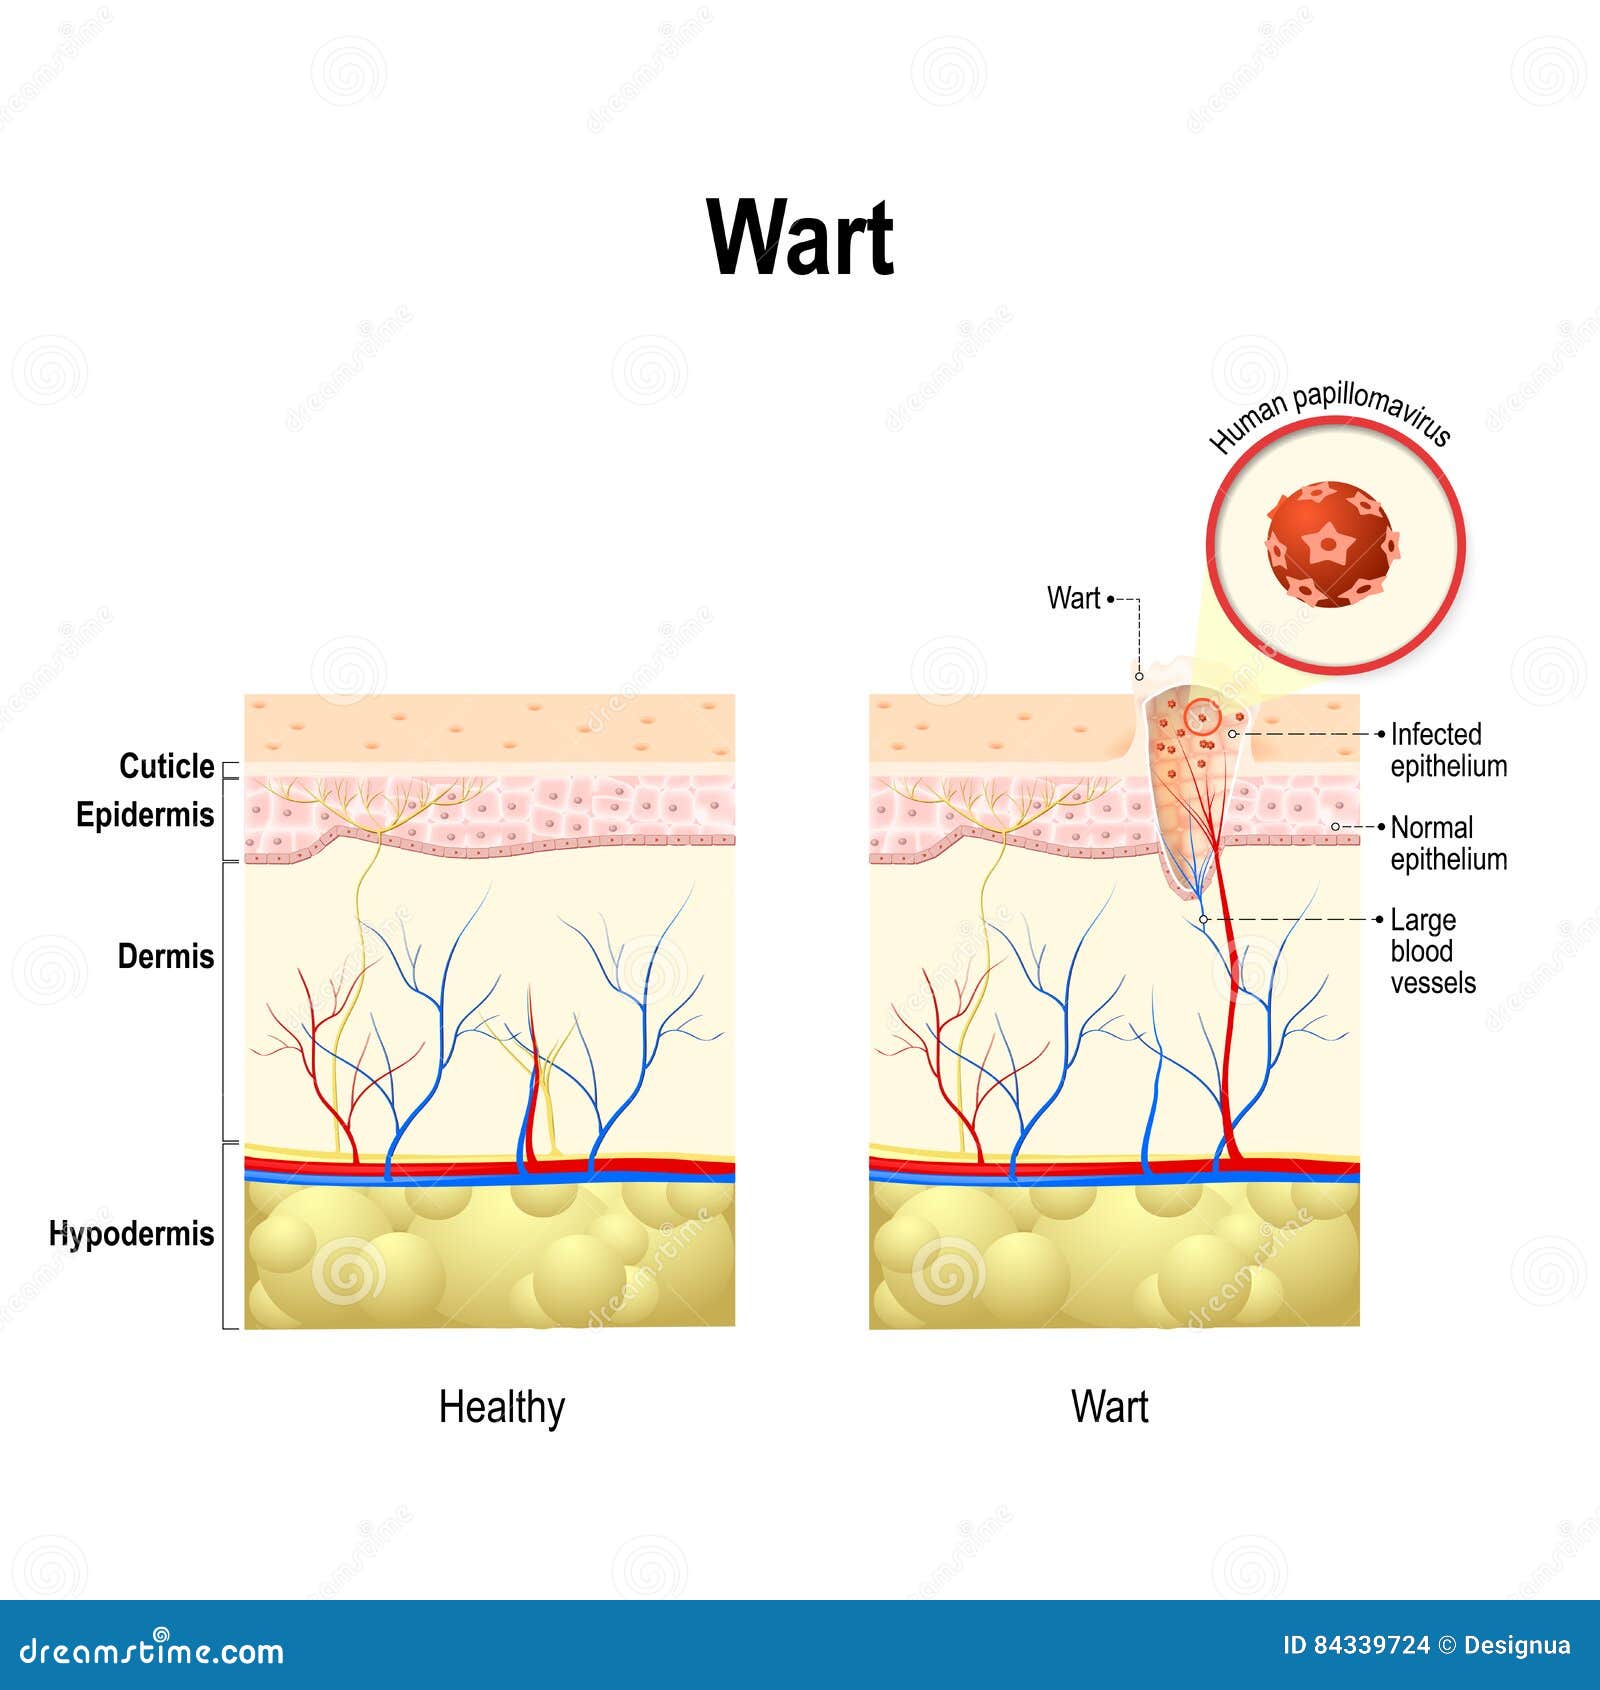 Hpv cancer and warts